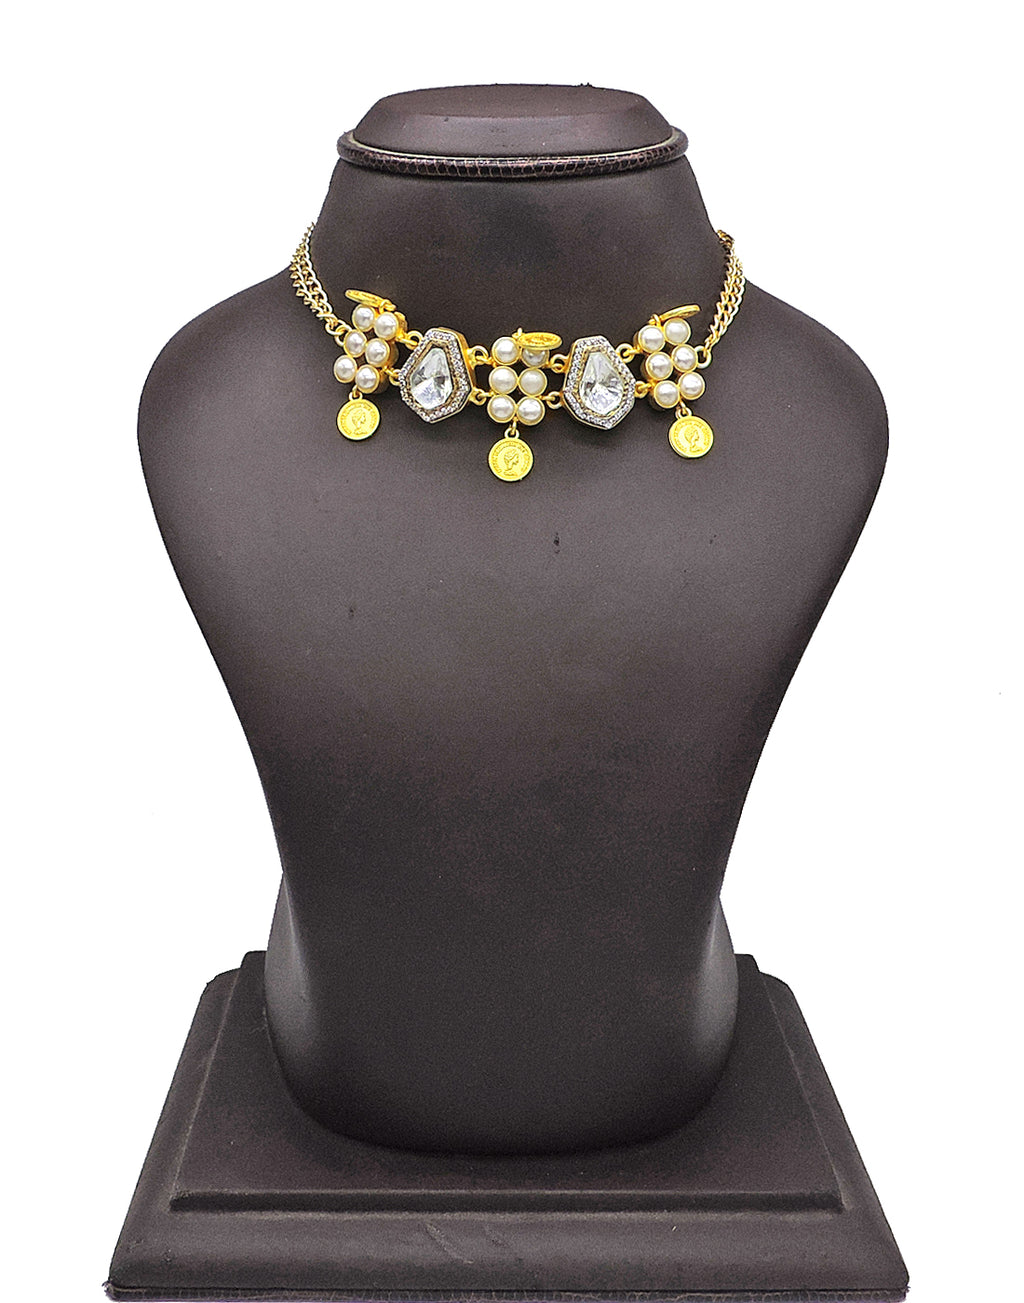 Coin & Crystal Necklace - Statement Necklaces - Gold-Plated & Hypoallergenic Jewellery - Made in India - Dubai Jewellery - Dori